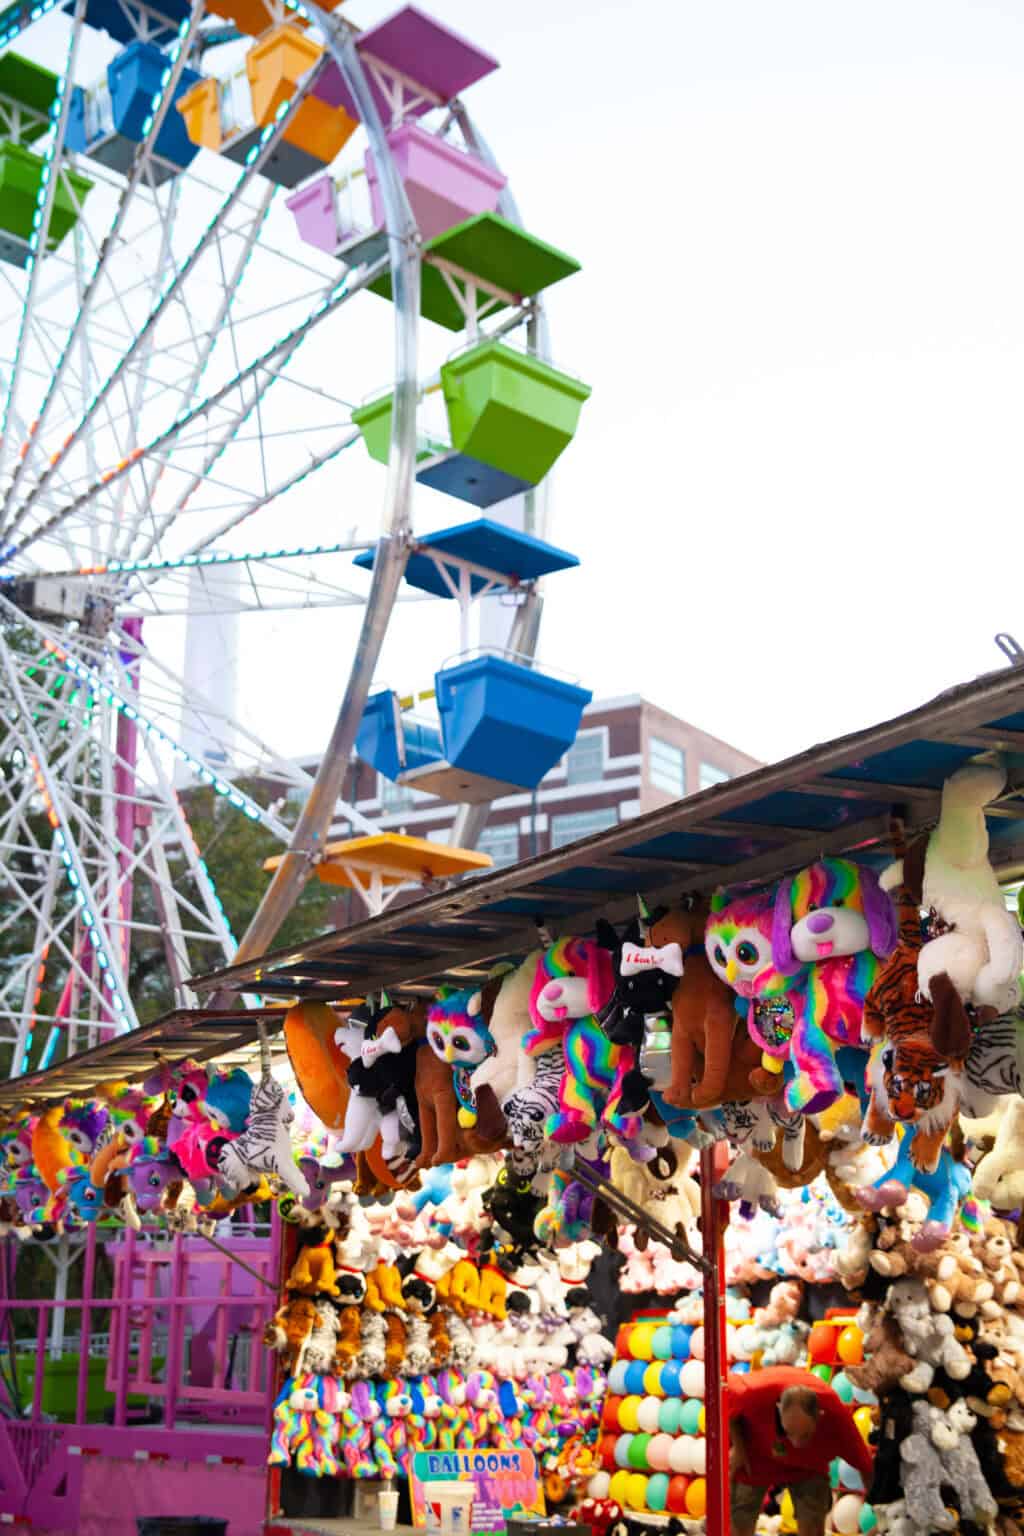 a group of stuffed animals from a roof